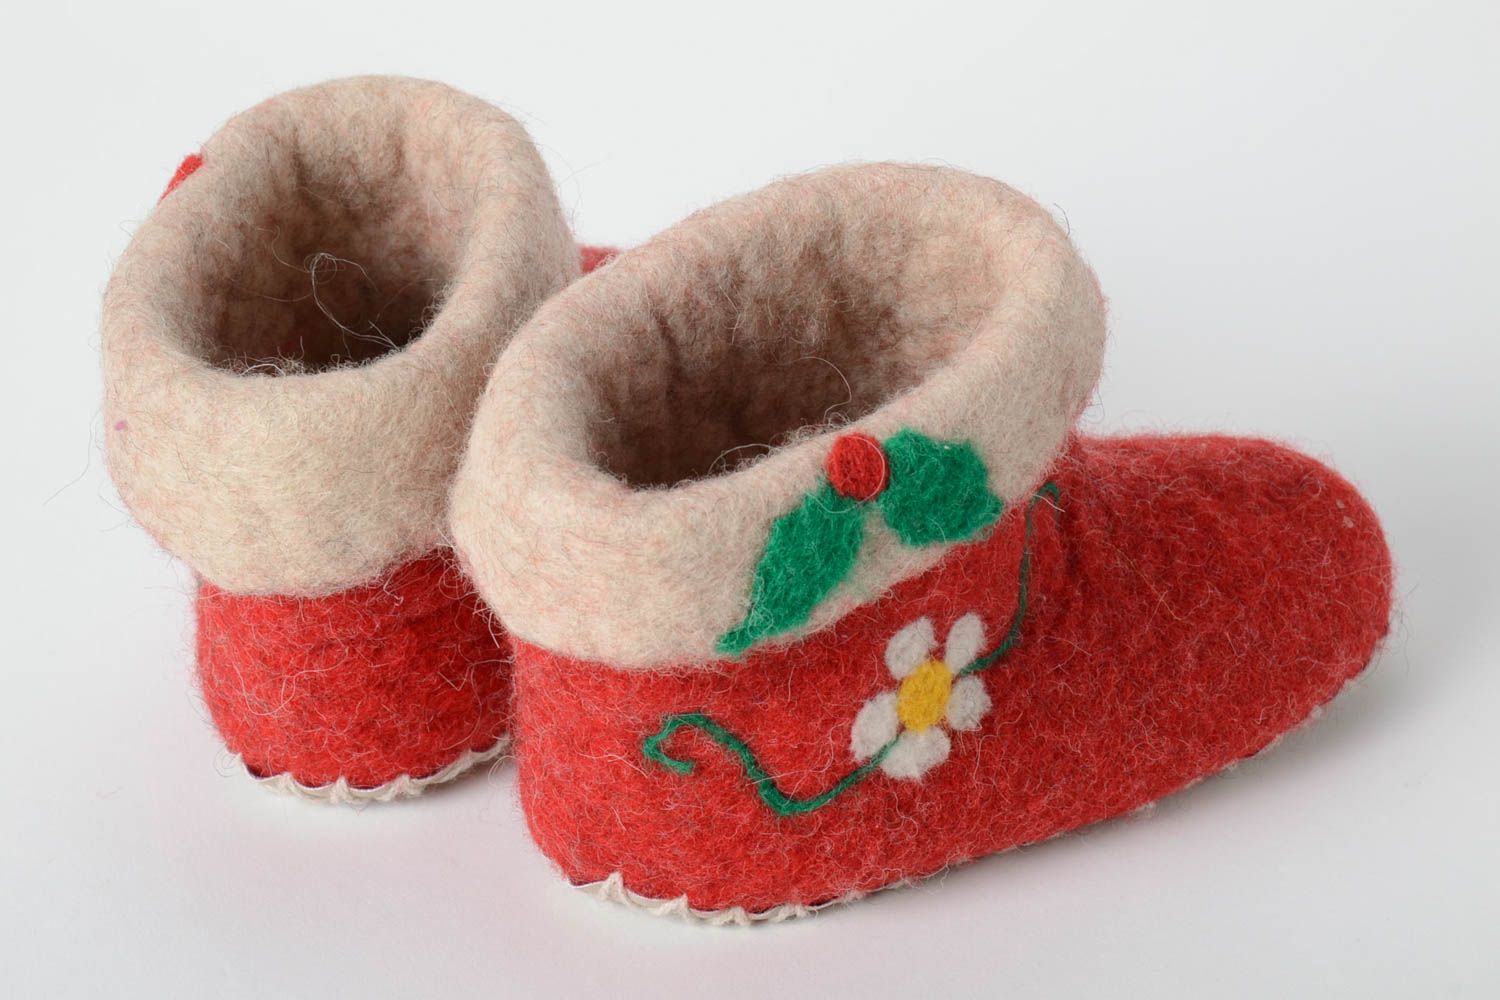 Handmade room slippers stylish shoes for home unusual warm slippers cute gift photo 3